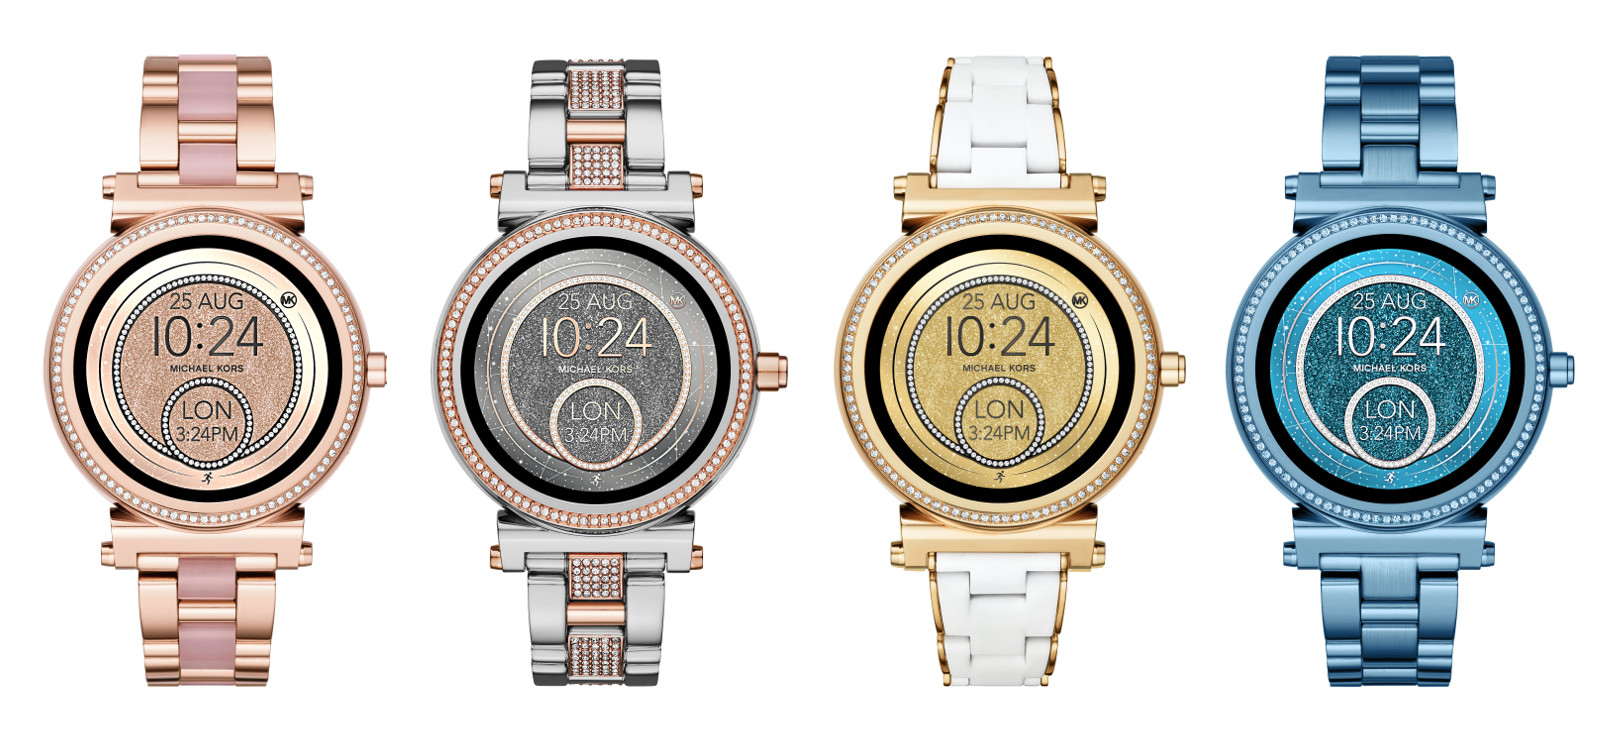 Michael Kors offers Android Wear 